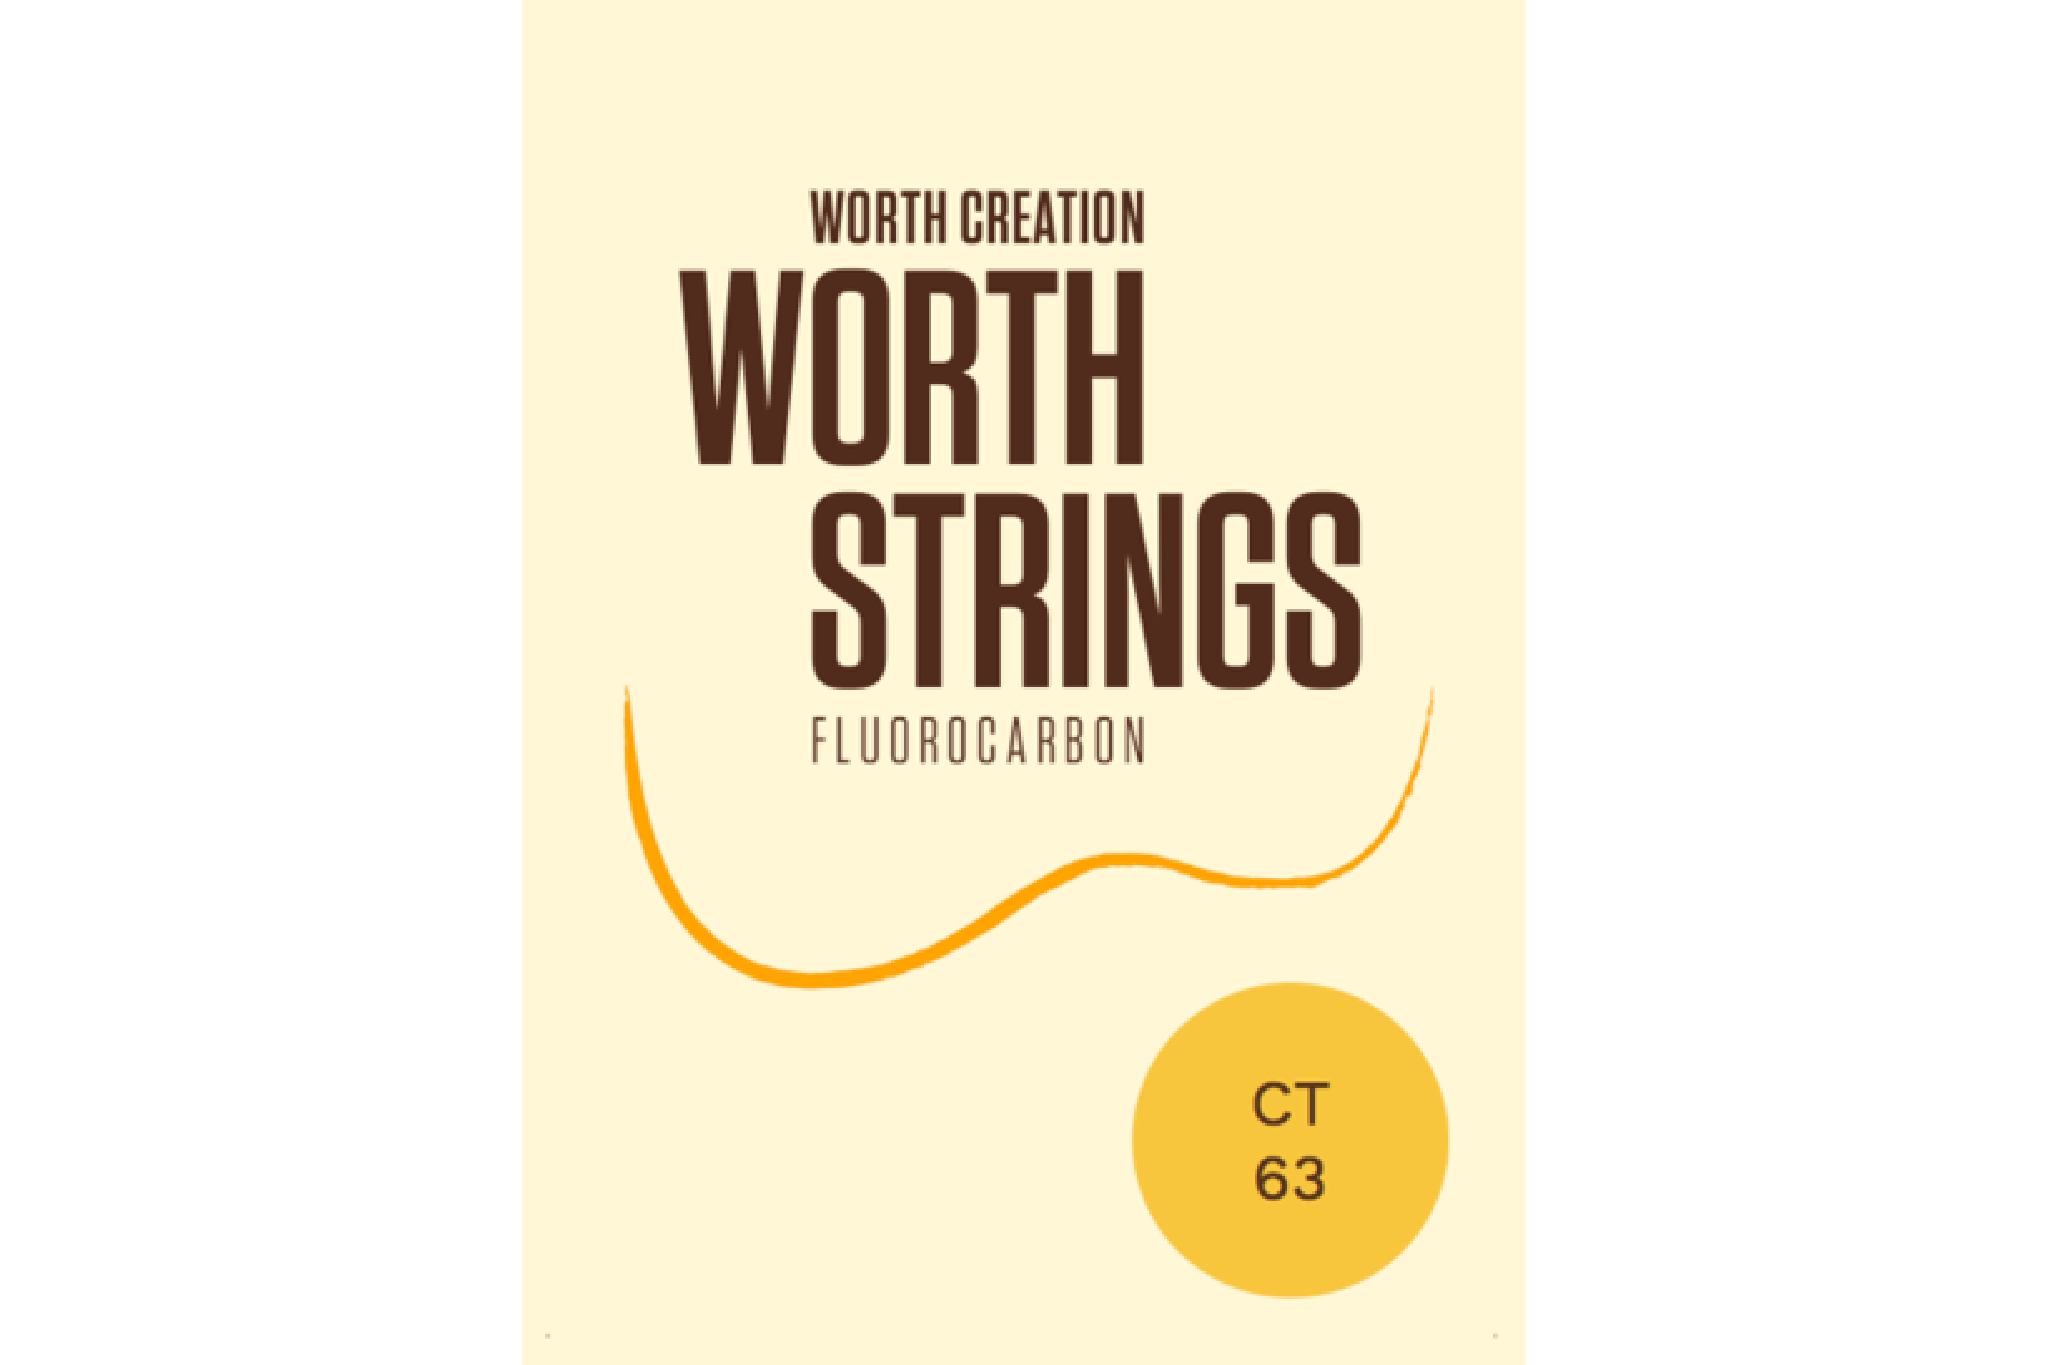 Worth Clear Fluorocarbon 6 String Tenor Ukulele Strings C6-63 inch (G-c-C-E-A-a) Enough For 2 Sets